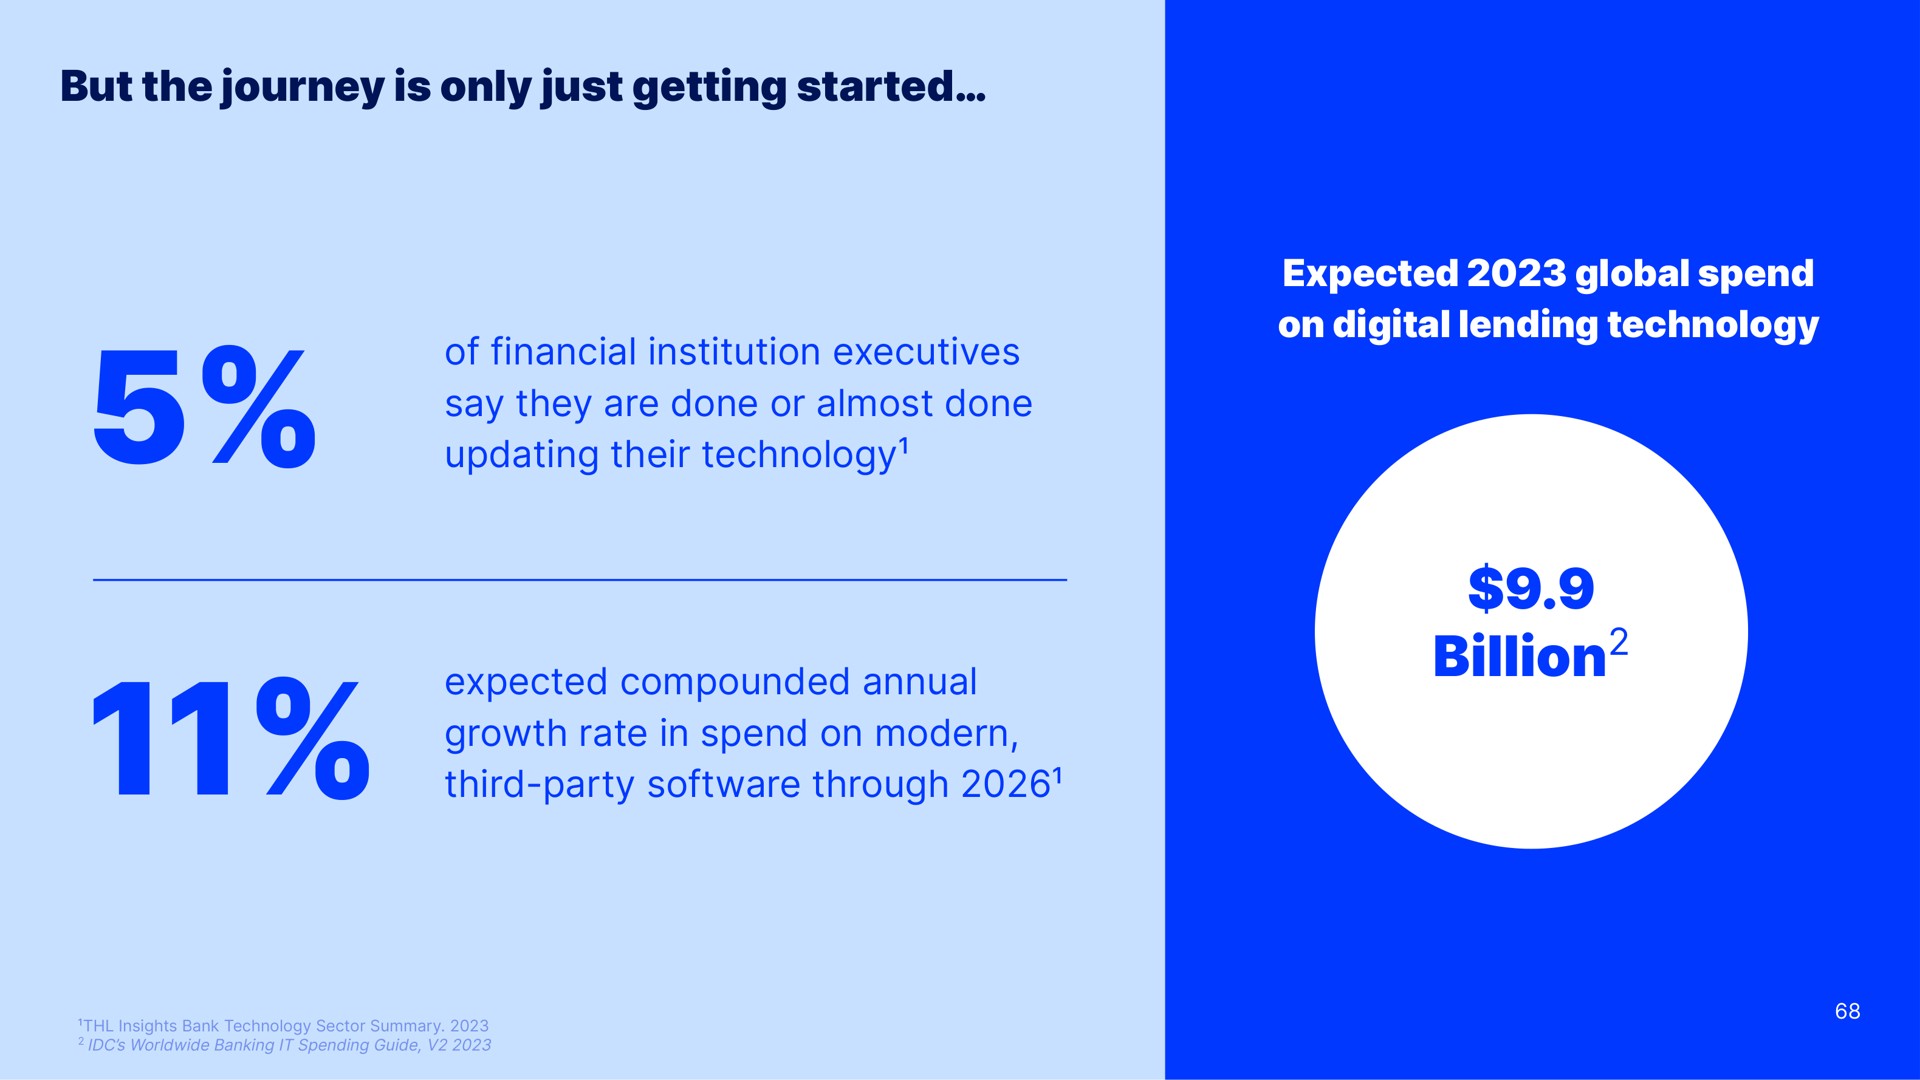 but the journey is only just getting started of financial institution executives say they are done or almost done updating their technology expected compounded annual growth rate in spend on modern third party through expected global spend on digital lending technology billion billion | Blend